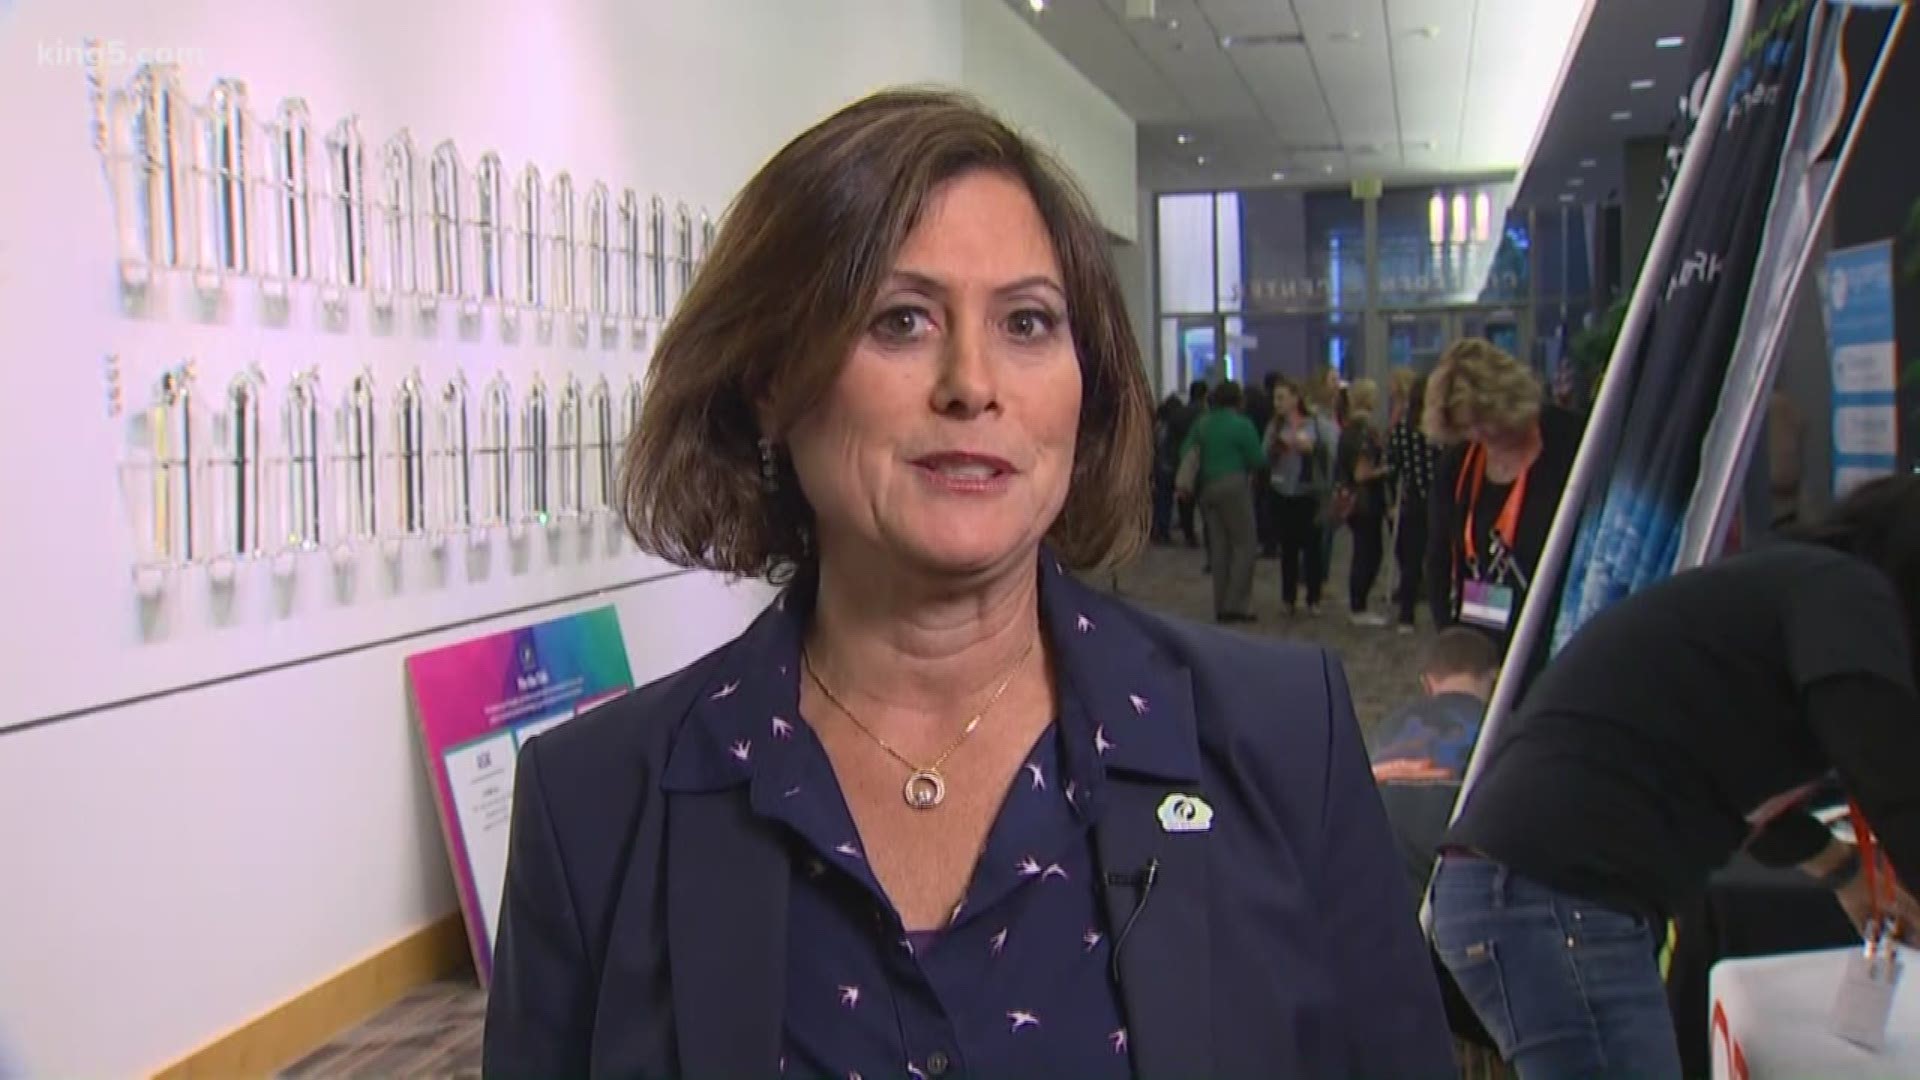 KING 5 spoke with Gavriella Schuster, of Microsoft, about the Women in Cloud summit happening this weekend at Microsoft's campus in Redmond.